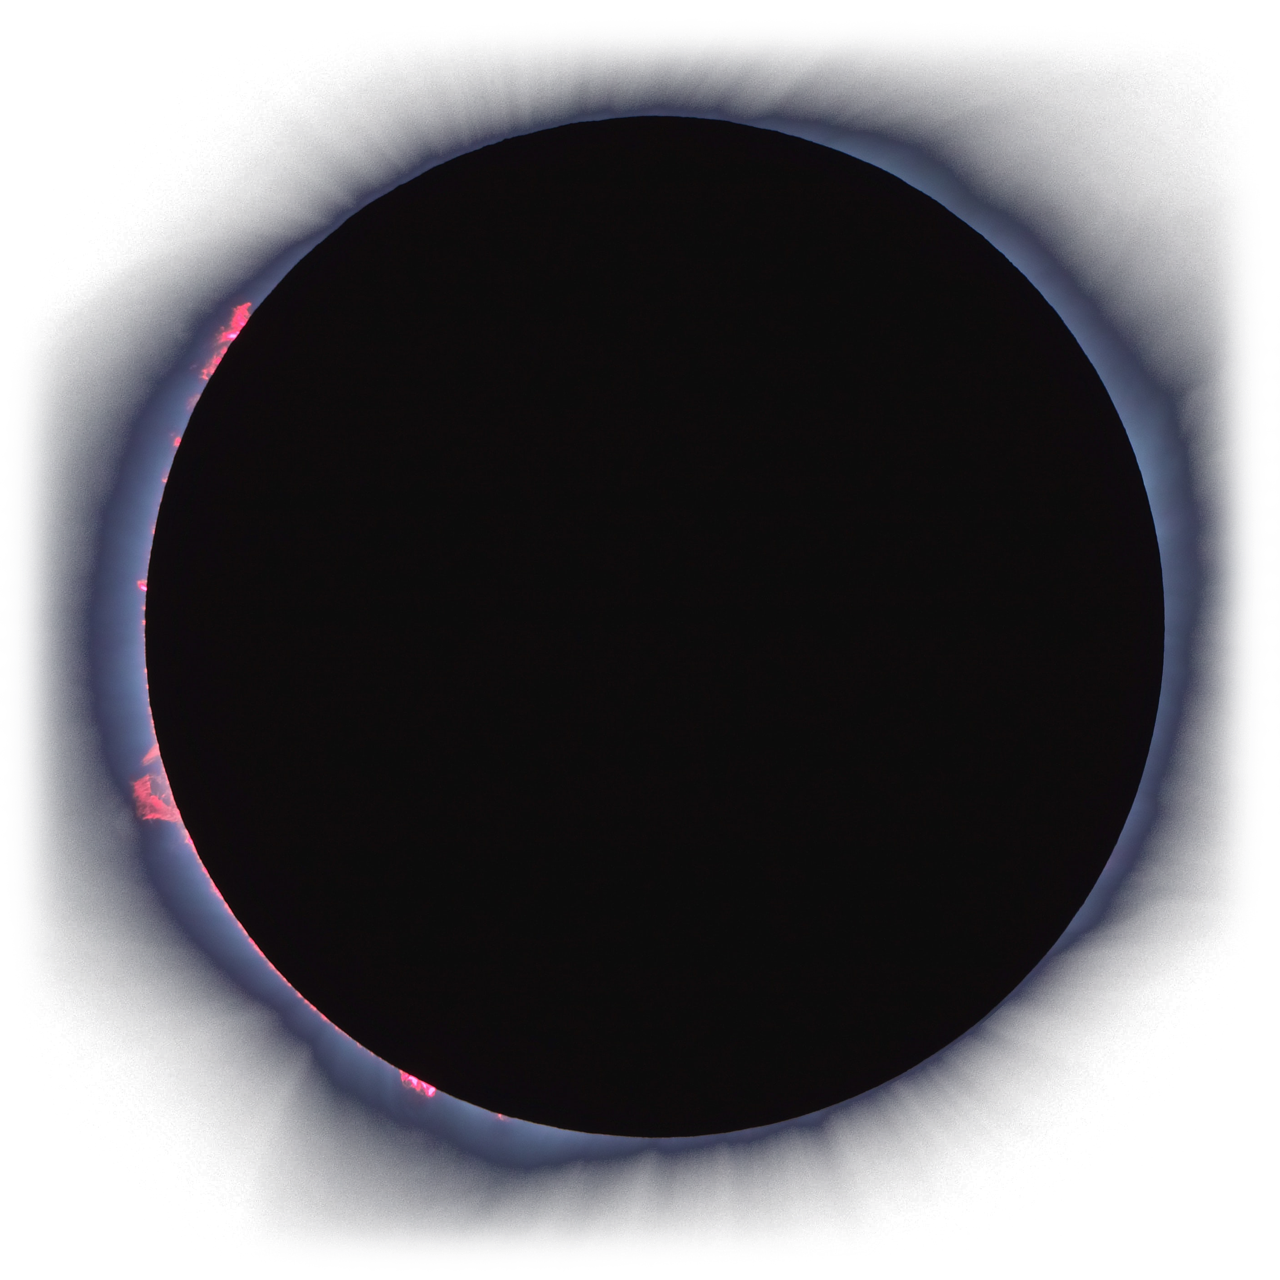 Decorative image of an eclipse